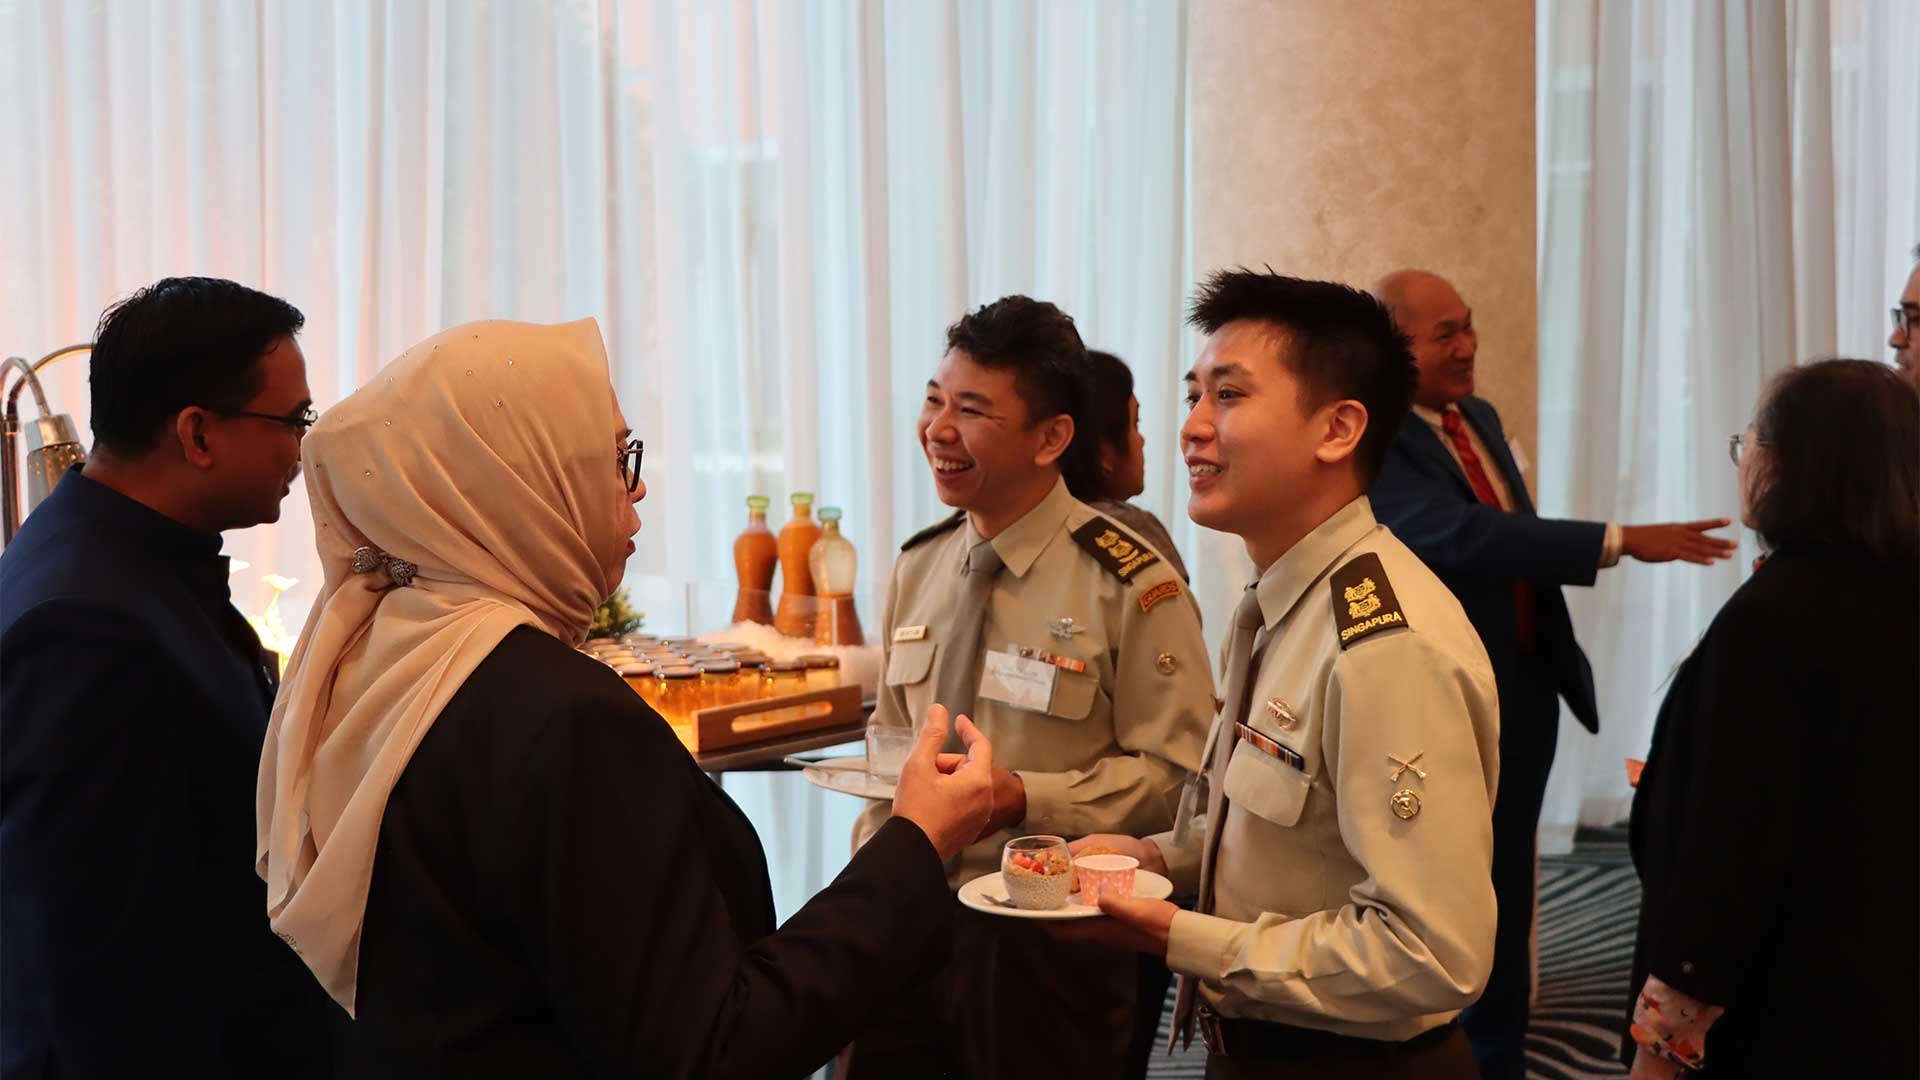 Personnel at Networking Event